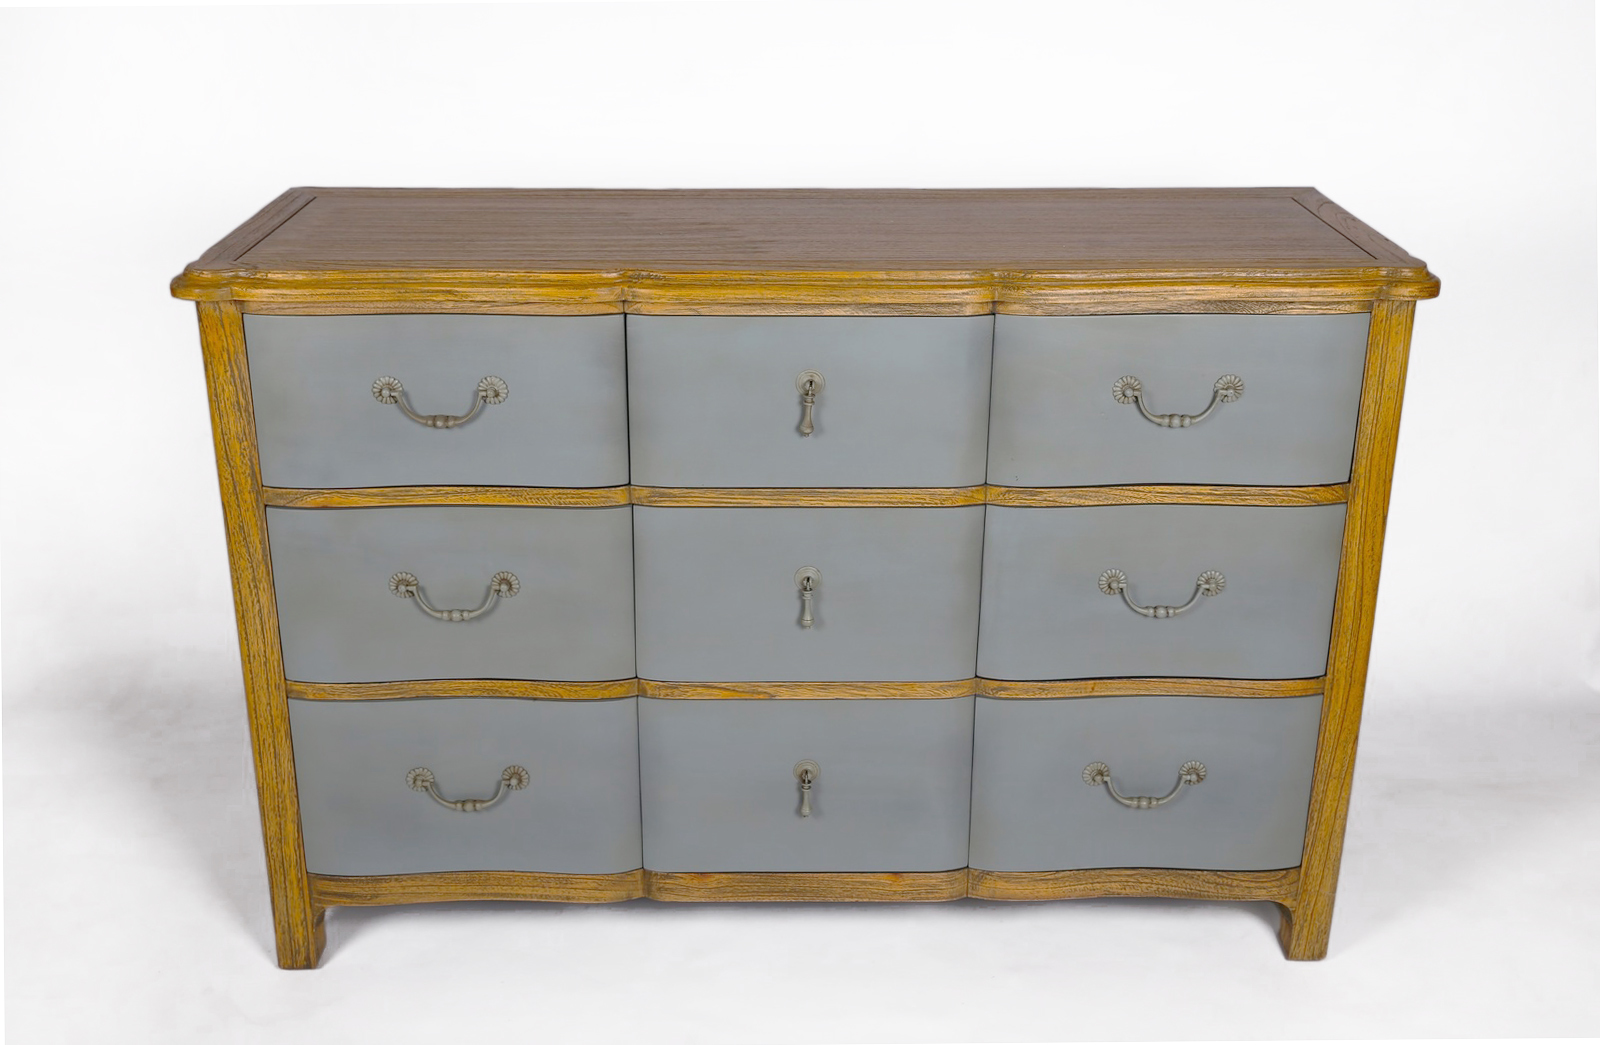 PRESLEY TIMBER CHEST OF DRAWERS